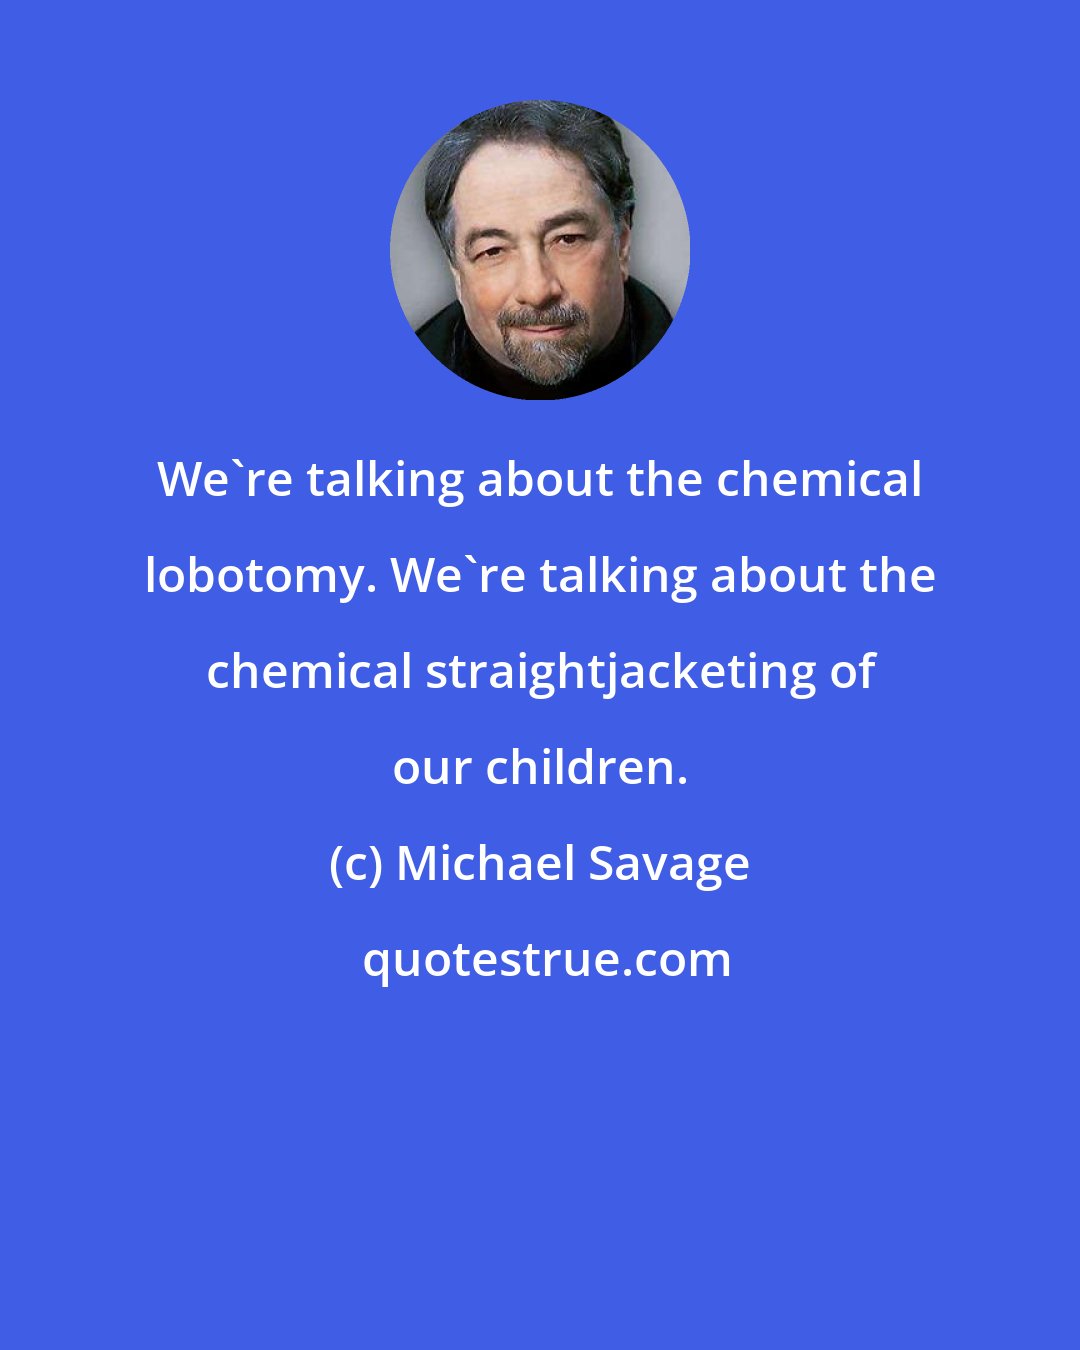 Michael Savage: We're talking about the chemical lobotomy. We're talking about the chemical straightjacketing of our children.